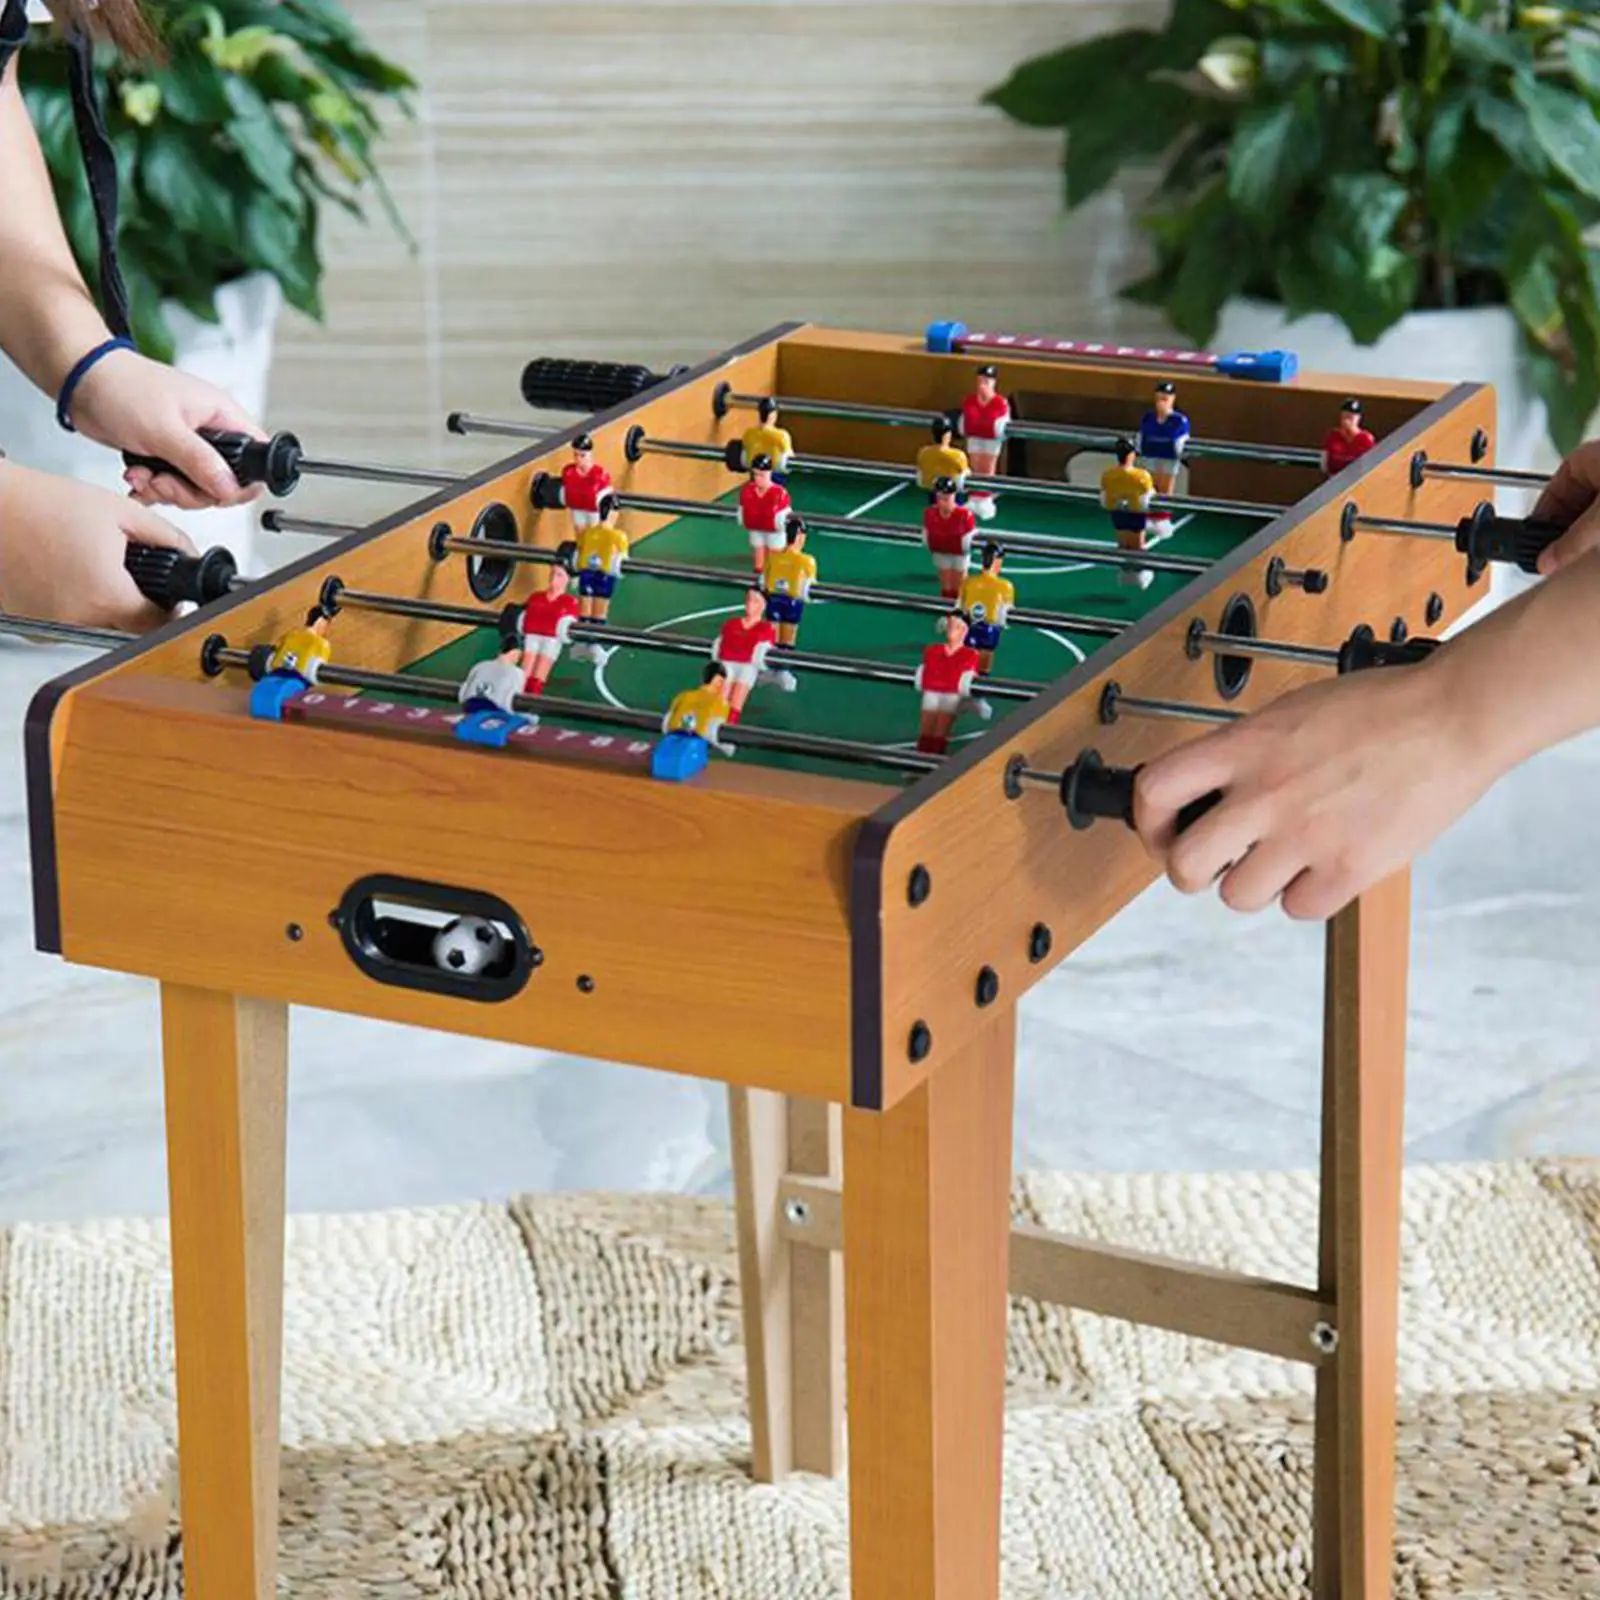 Wood Foosball Table Tabletop Football Game Interactive Toy with Ball Funny Football Game Desktop Game for Family